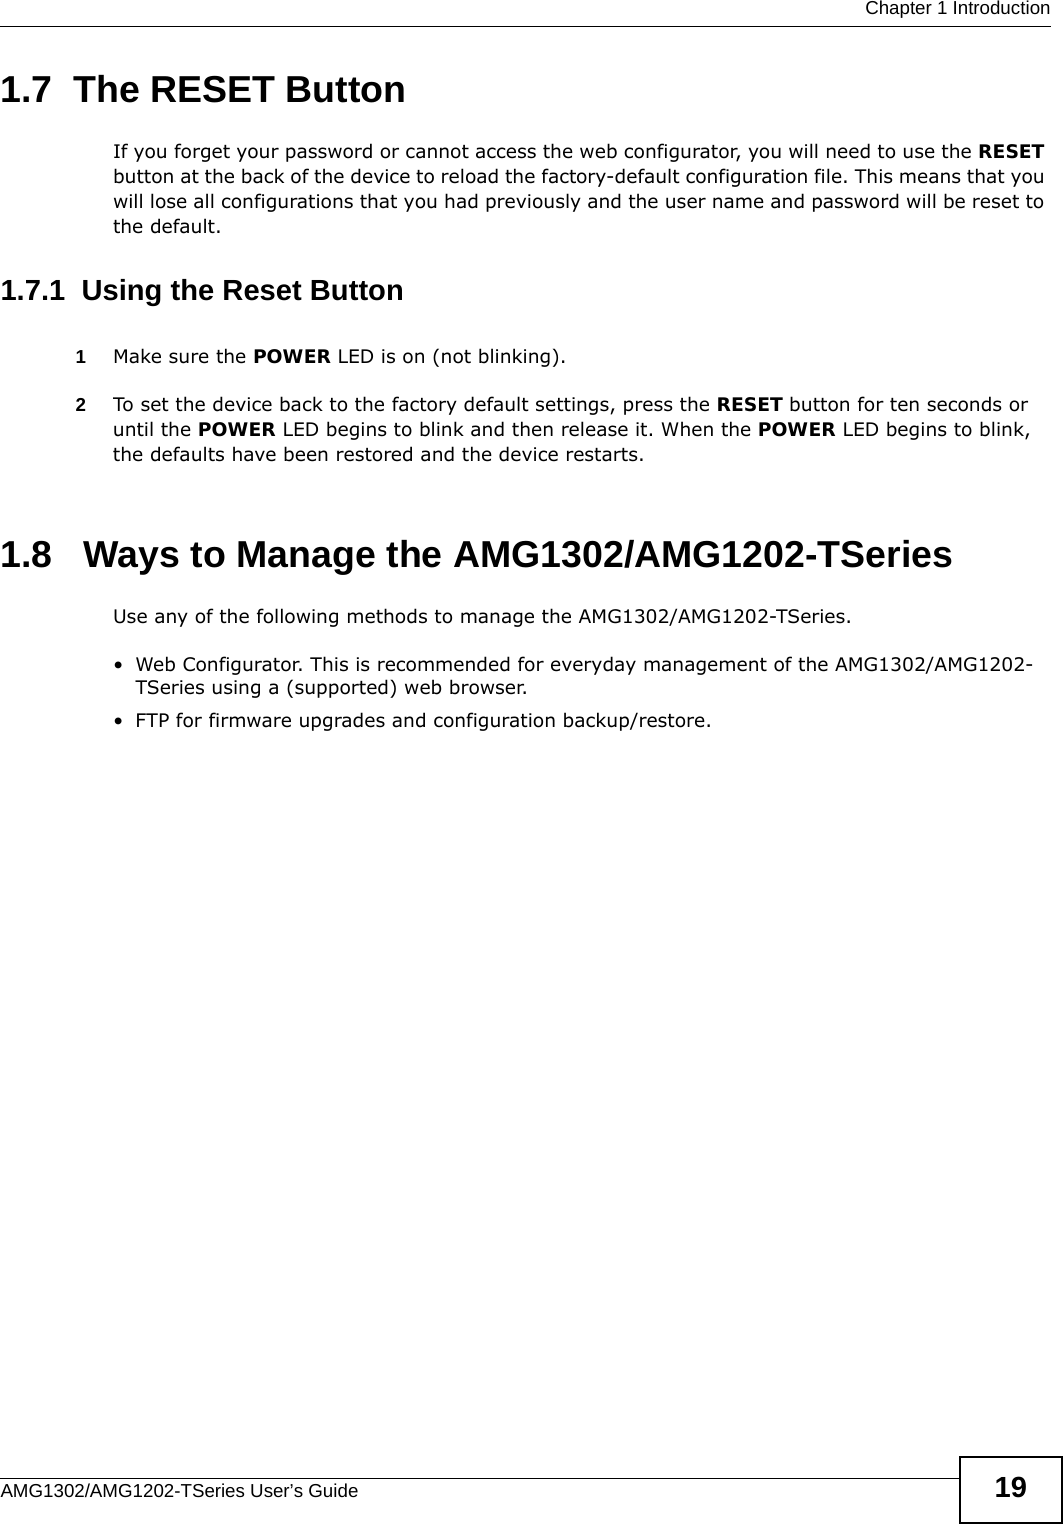  Chapter 1 IntroductionAMG1302/AMG1202-TSeries User’s Guide 191.7  The RESET ButtonIf you forget your password or cannot access the web configurator, you will need to use the RESET button at the back of the device to reload the factory-default configuration file. This means that you will lose all configurations that you had previously and the user name and password will be reset to the default.1.7.1  Using the Reset Button1Make sure the POWER LED is on (not blinking).2To set the device back to the factory default settings, press the RESET button for ten seconds or until the POWER LED begins to blink and then release it. When the POWER LED begins to blink, the defaults have been restored and the device restarts.1.8   Ways to Manage the AMG1302/AMG1202-TSeriesUse any of the following methods to manage the AMG1302/AMG1202-TSeries.• Web Configurator. This is recommended for everyday management of the AMG1302/AMG1202-TSeries using a (supported) web browser.• FTP for firmware upgrades and configuration backup/restore.